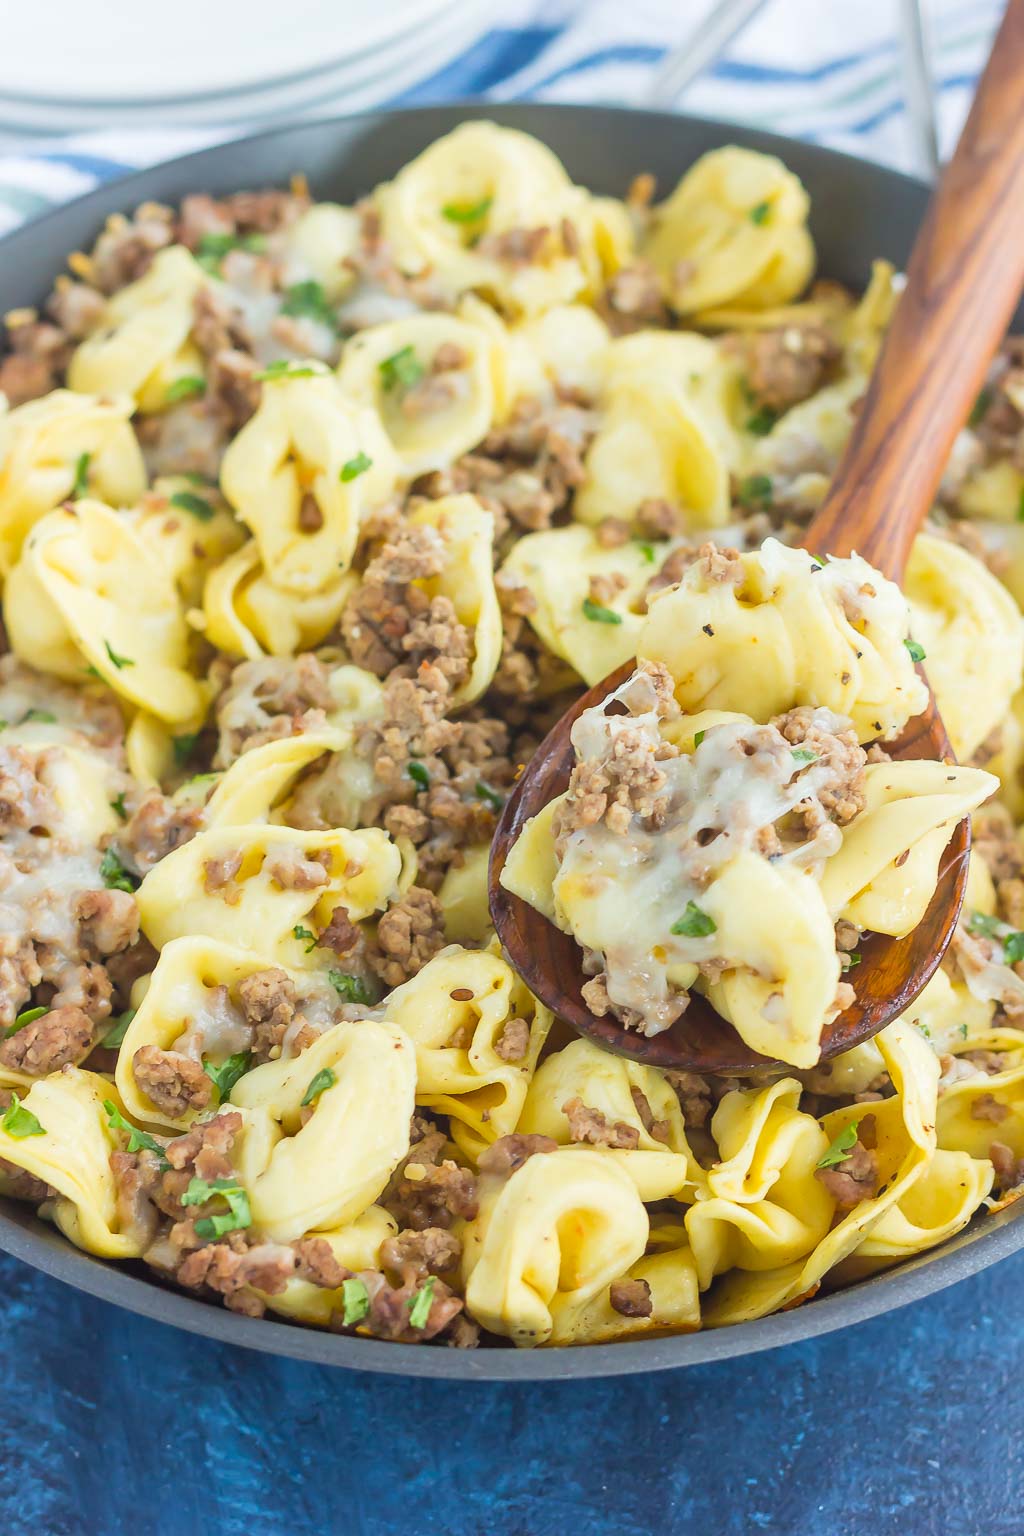 This Cheesy Beef Tortellini Skillet is a simple, one pan meal that's bursting with flavor. Loaded with ground beef, spices, tortellini, and cheese, this easy meal is family-friendly and so delicious!